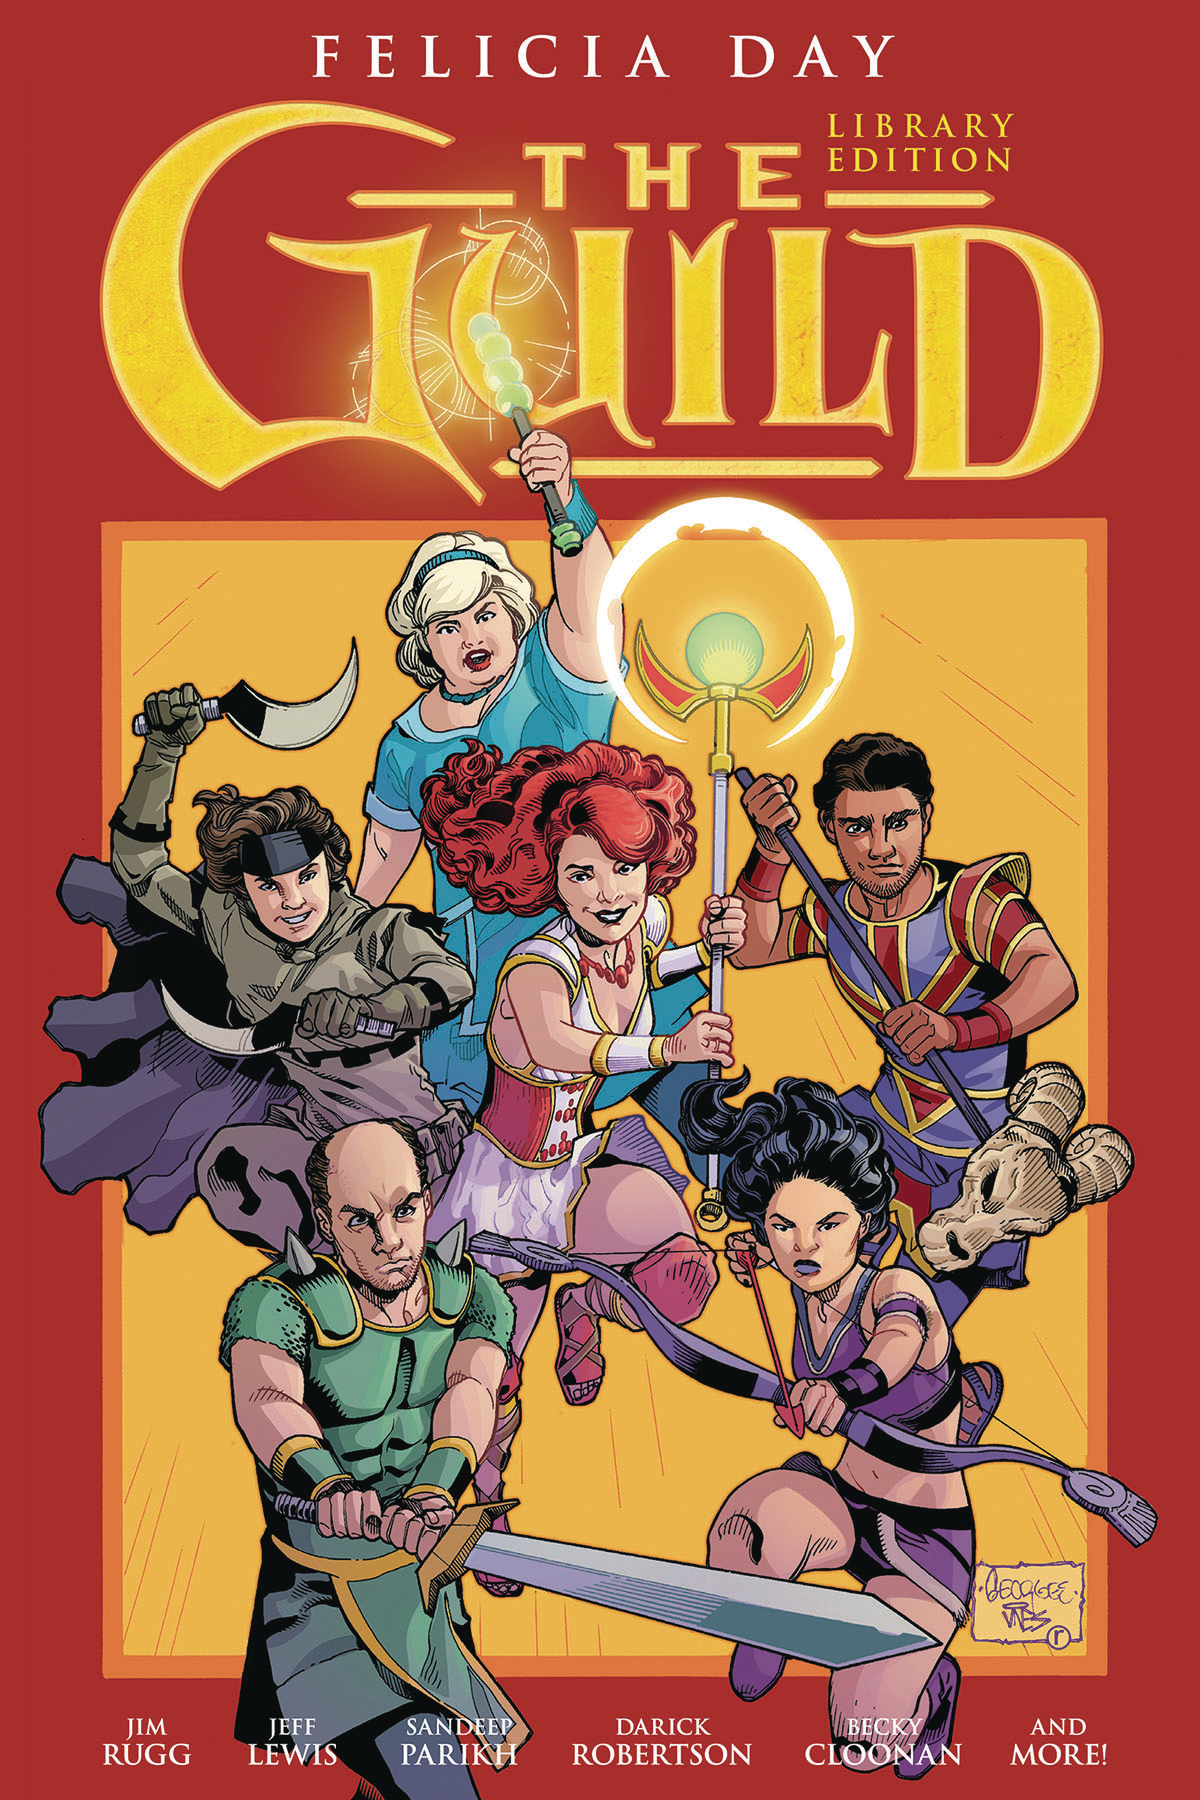 Guild Library Edition Hardcover Volume 1